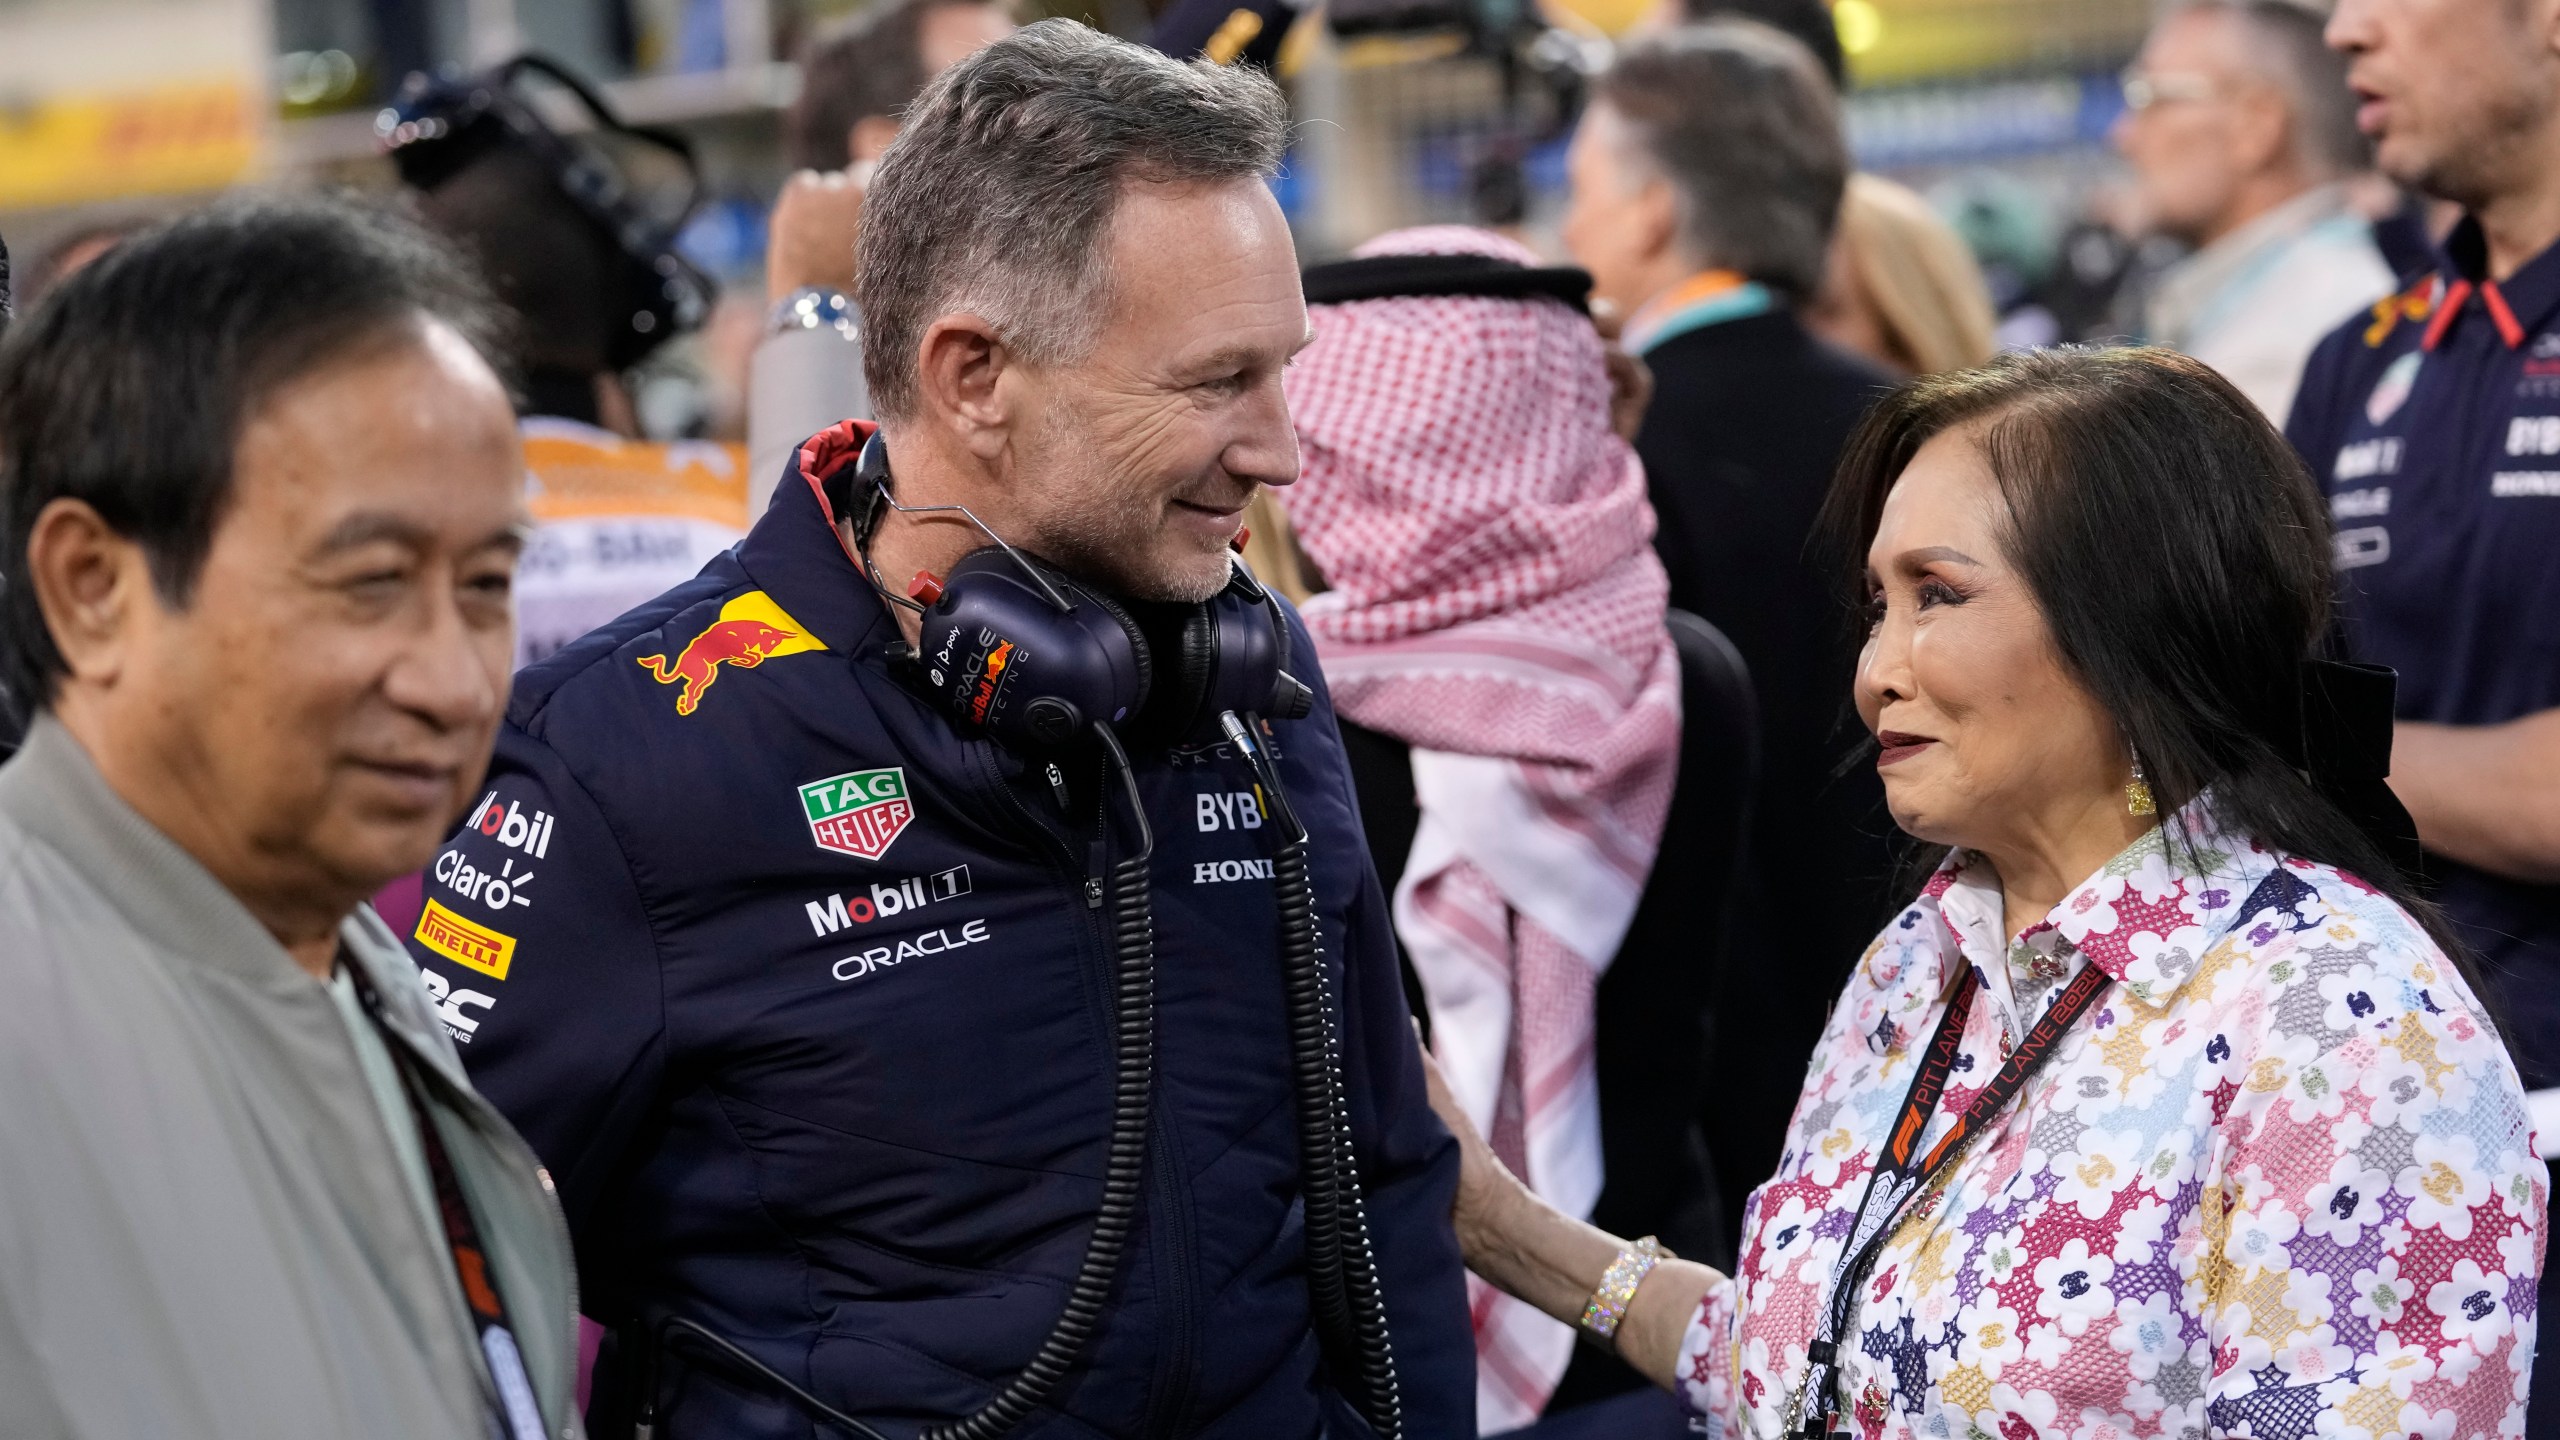 Red Bull co-owner Chalerm Yoovidhya, left, and his wife Daranee, right, speak with Red Bull team principal Christian Horner during the Formula One Bahrain Grand Prix at the Bahrain International Circuit in Sakhir, Bahrain, Saturday, March 2, 2024. (AP Photo/Darko Bandic)